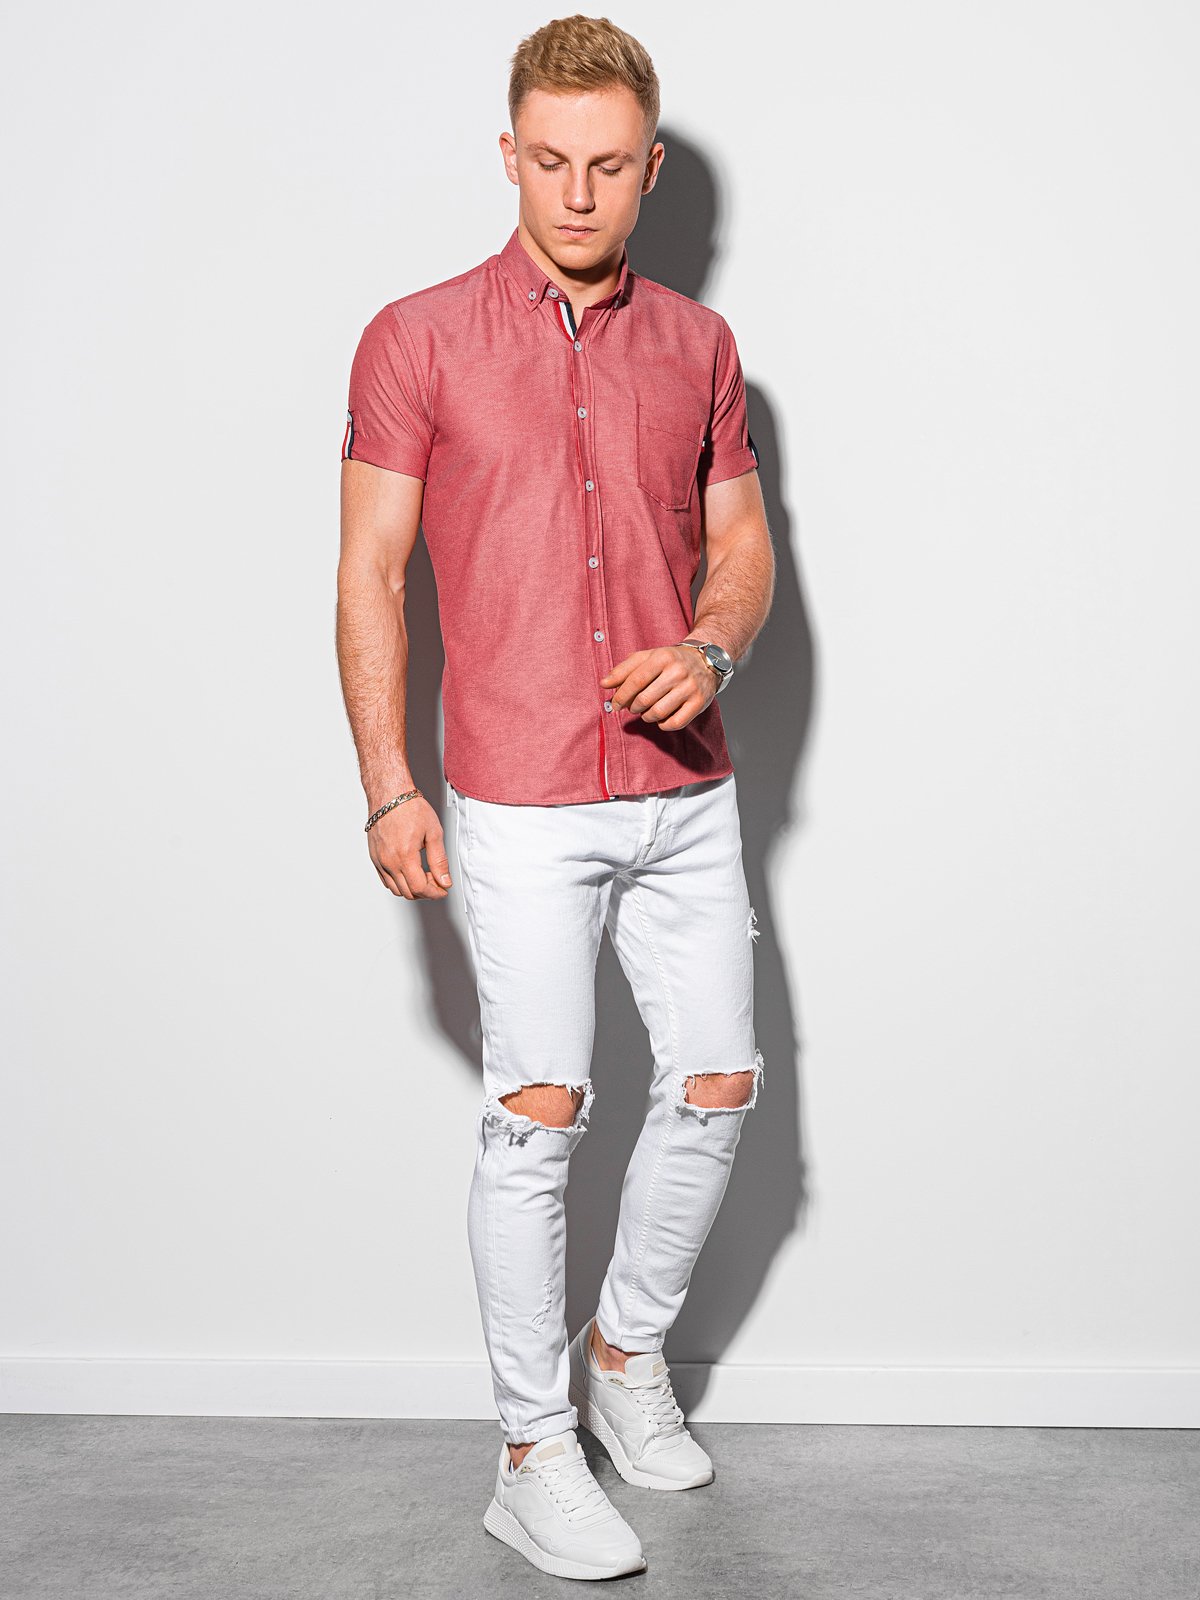 mens red short sleeve button up